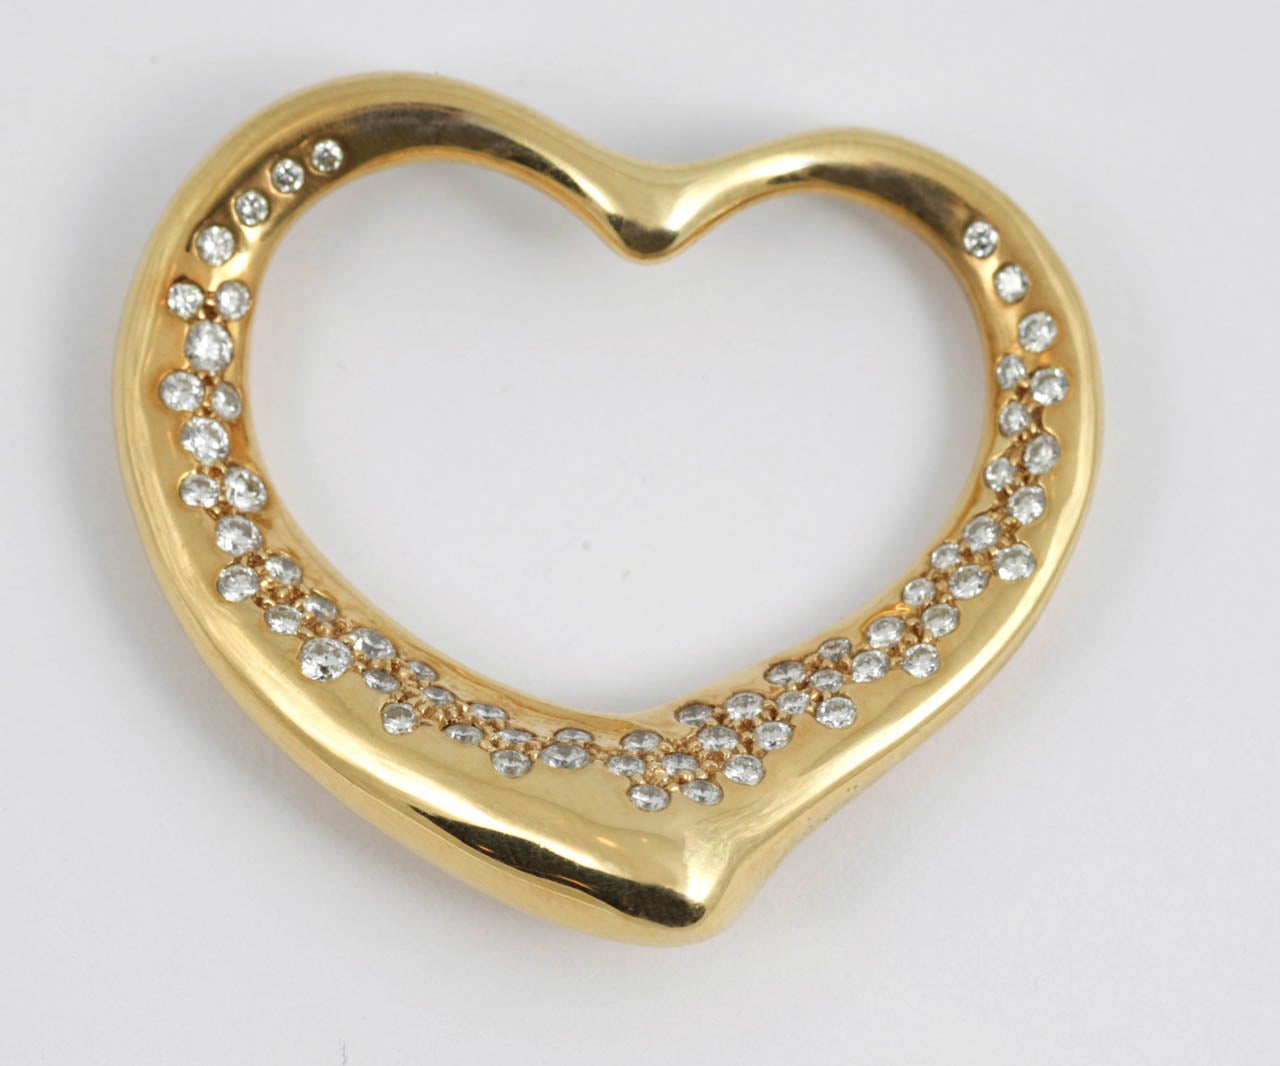 Tiffany and co,18ct gold and diamond heart pendant